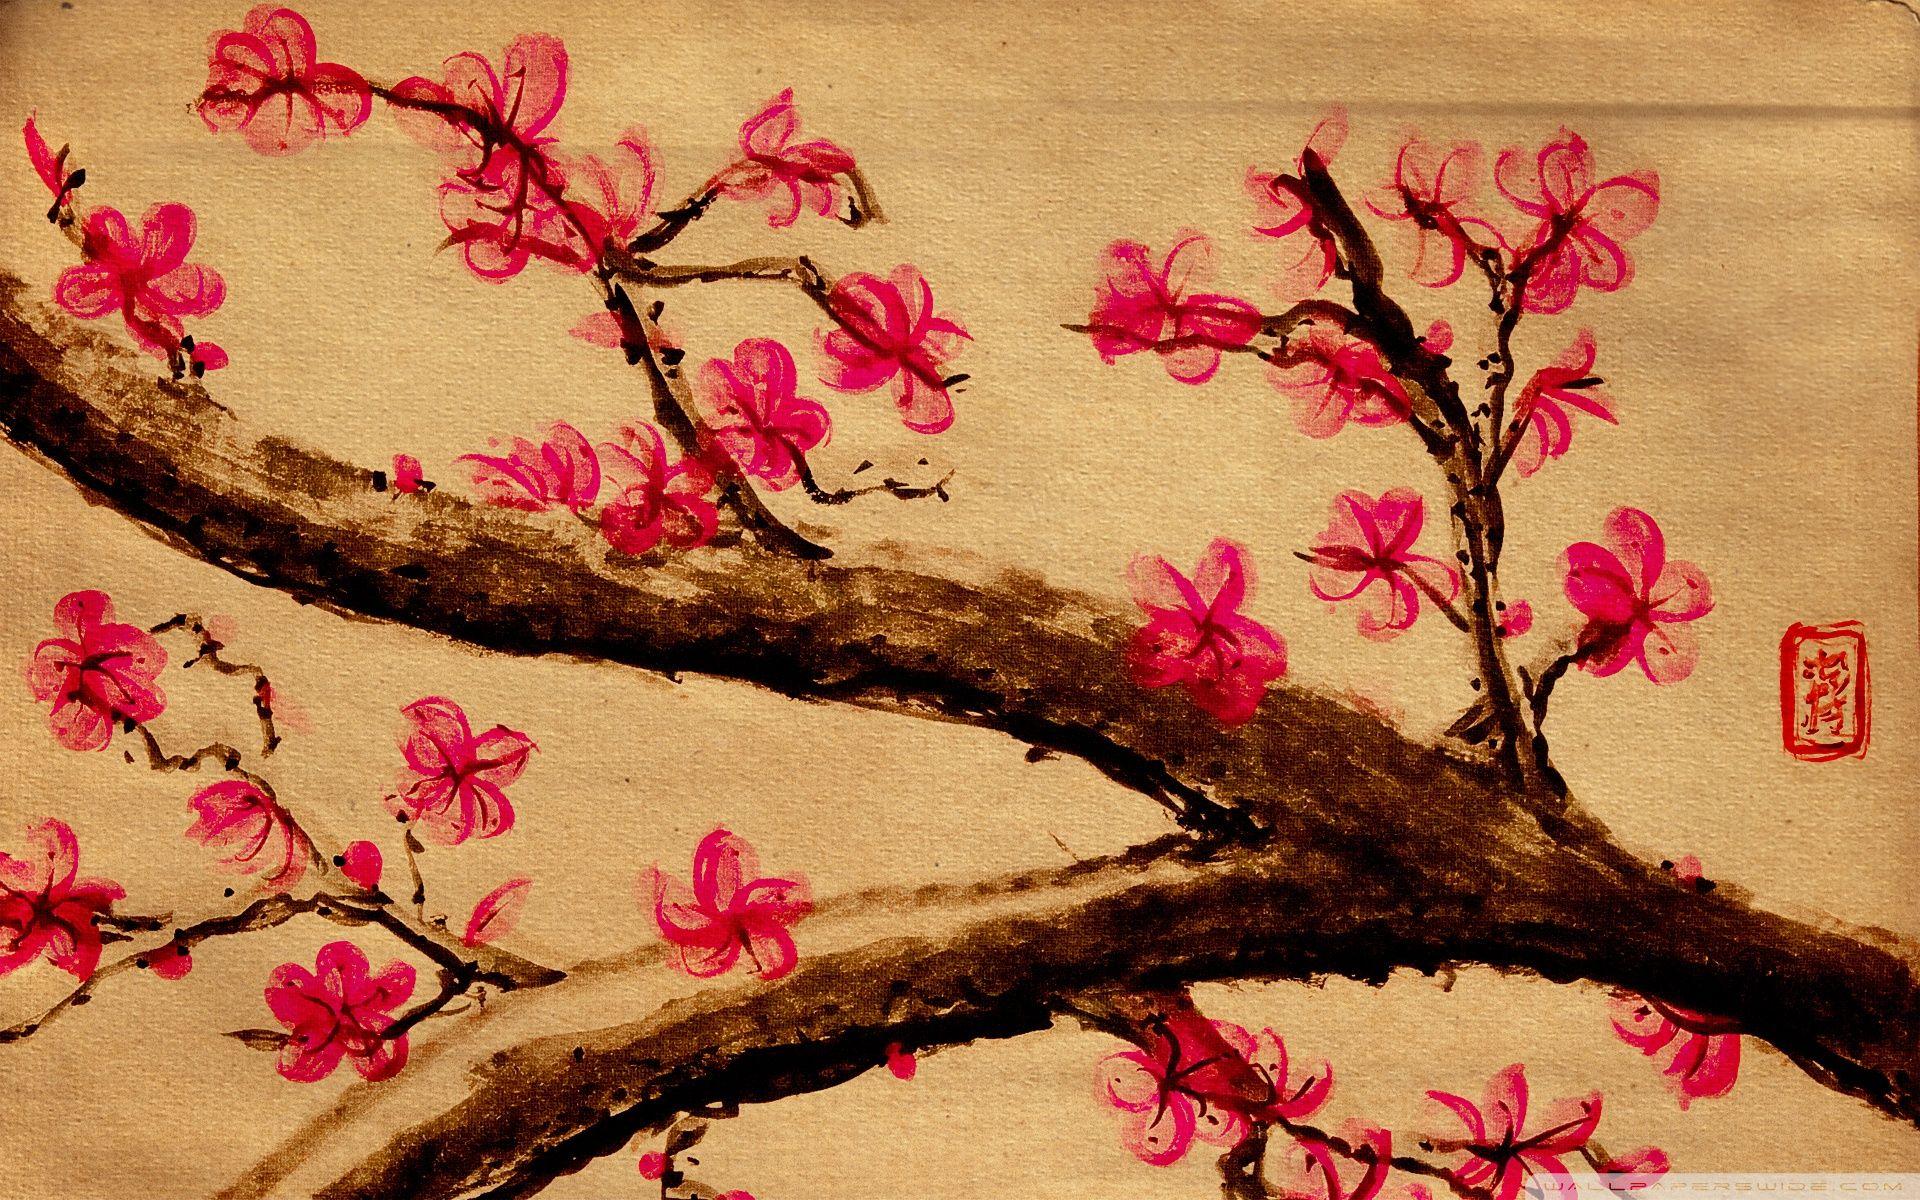 Cherry Blossom Painting Wallpapers - Wallpaper Cave